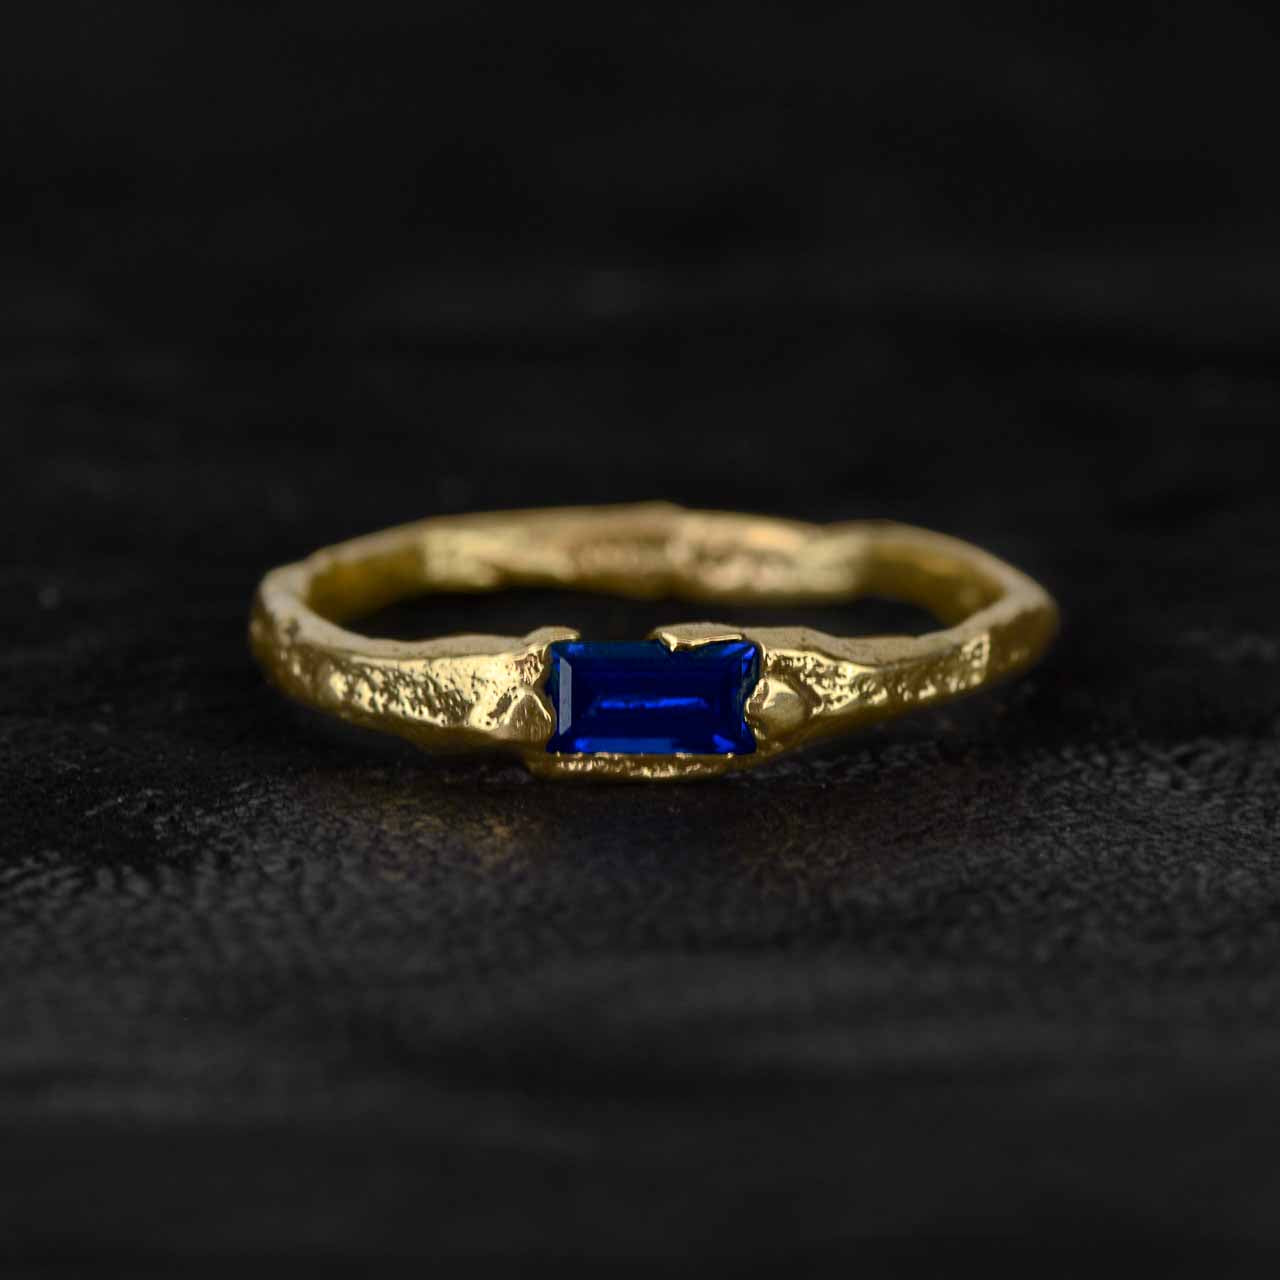 An engagement ring in yellow gold with a blue gemstone on a dark background.